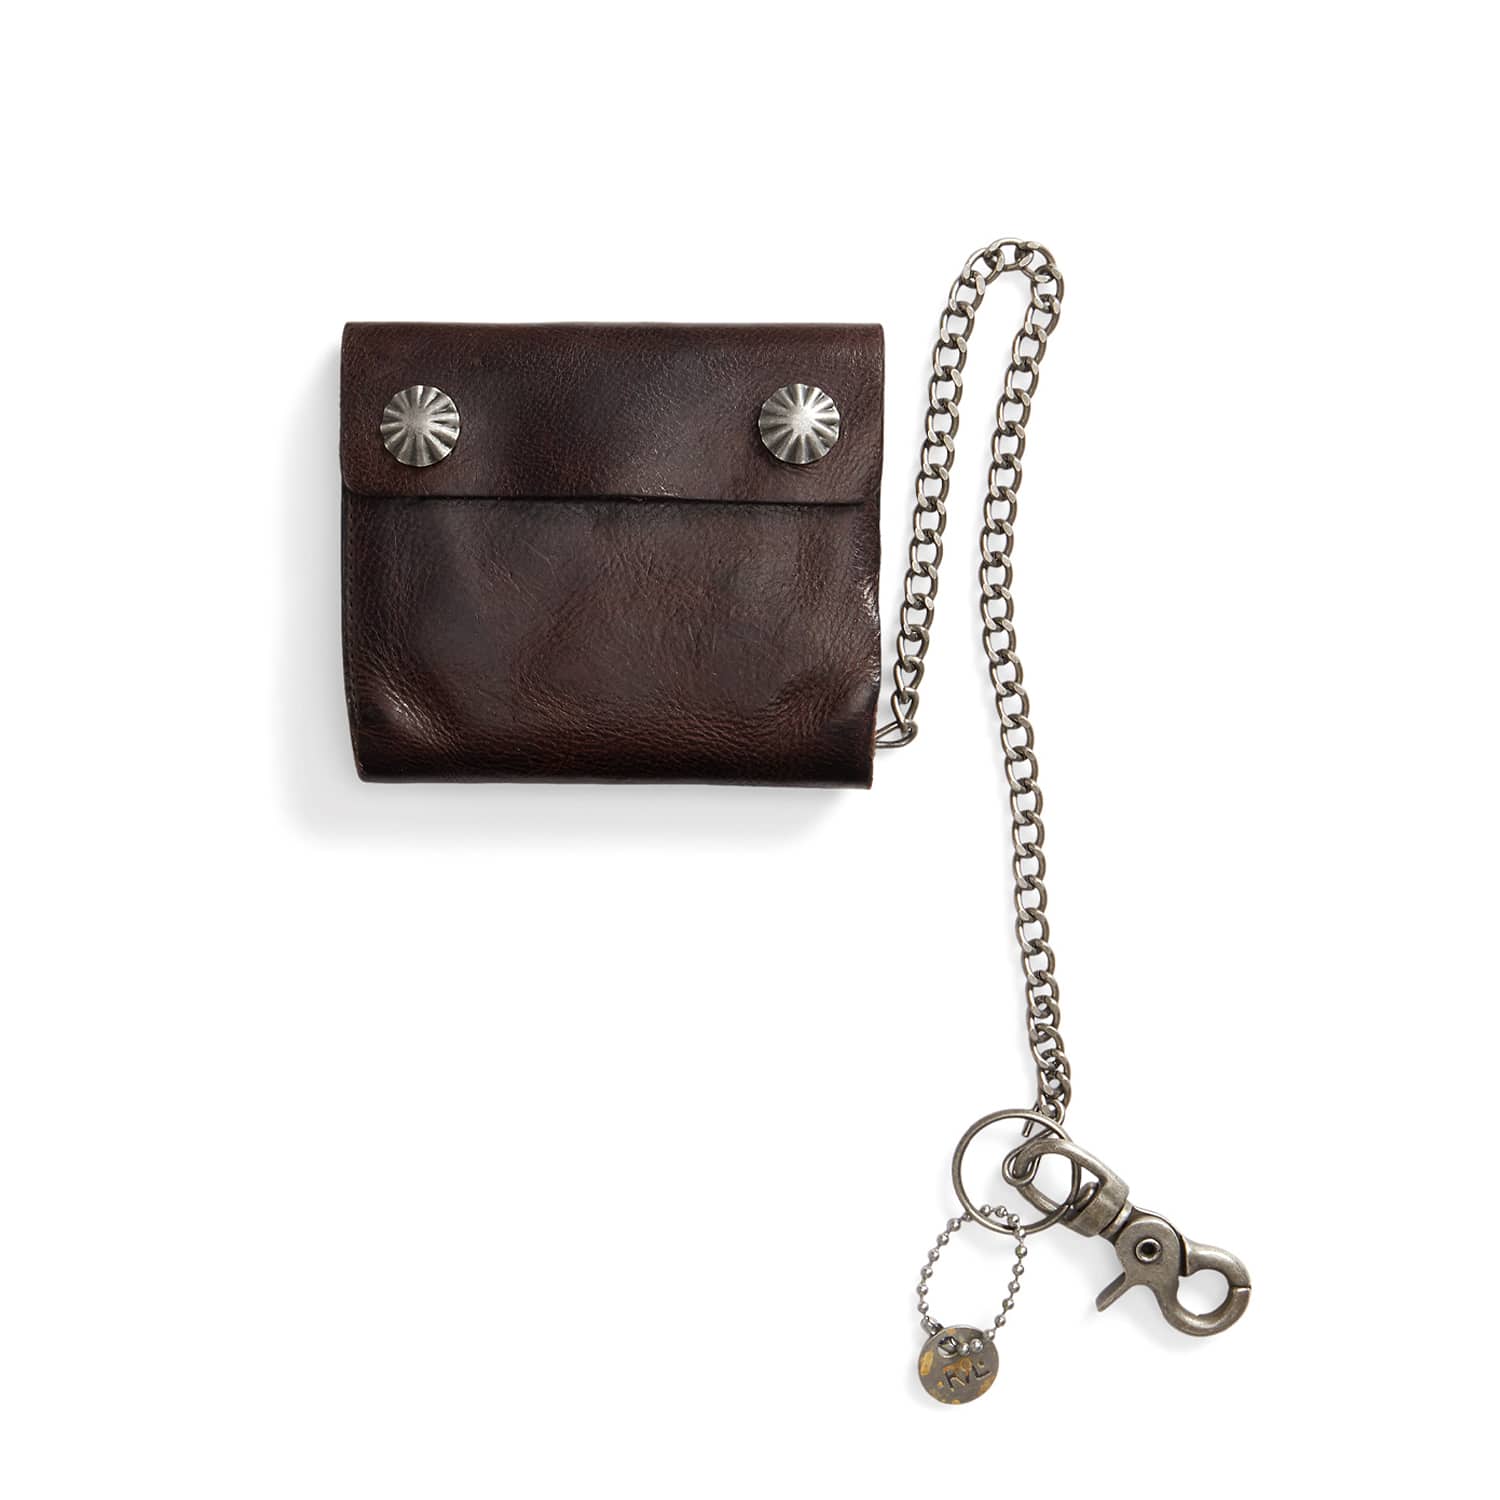 Double RL Concho Leather Chain Wallet in Dark Brown